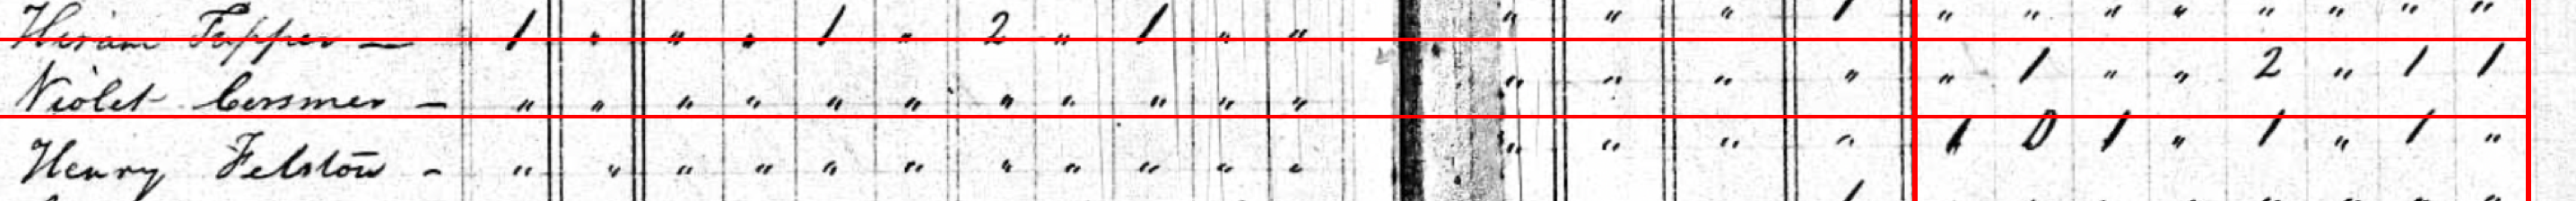 Violet appears in the 1820 census, along with other members of the household.